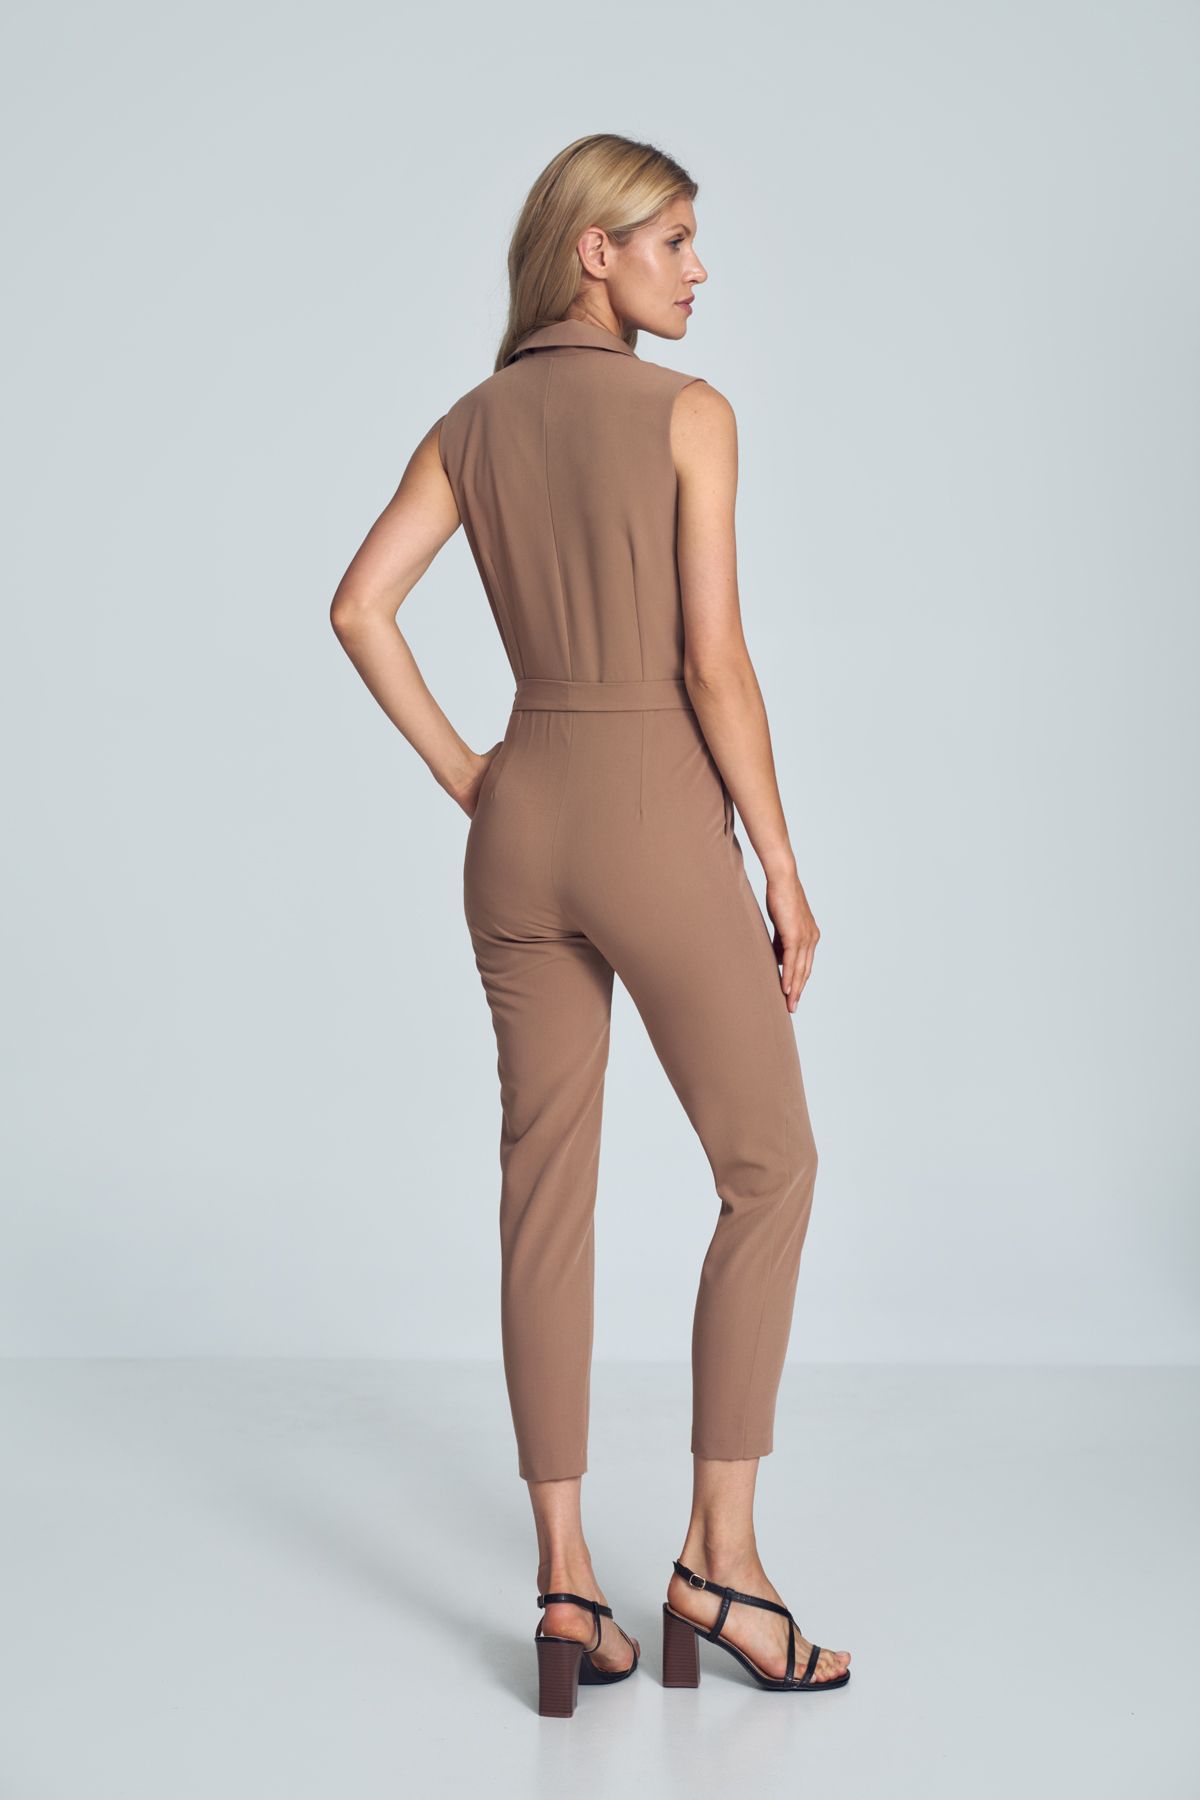 Brown V-neck jumpsuit with a collar, sleeveless, tied at the waist, loose legs tapered to the bottom. Fastened at the front at the waist with one external and internal snaps and a covered zipper. Pockets in the side seams.